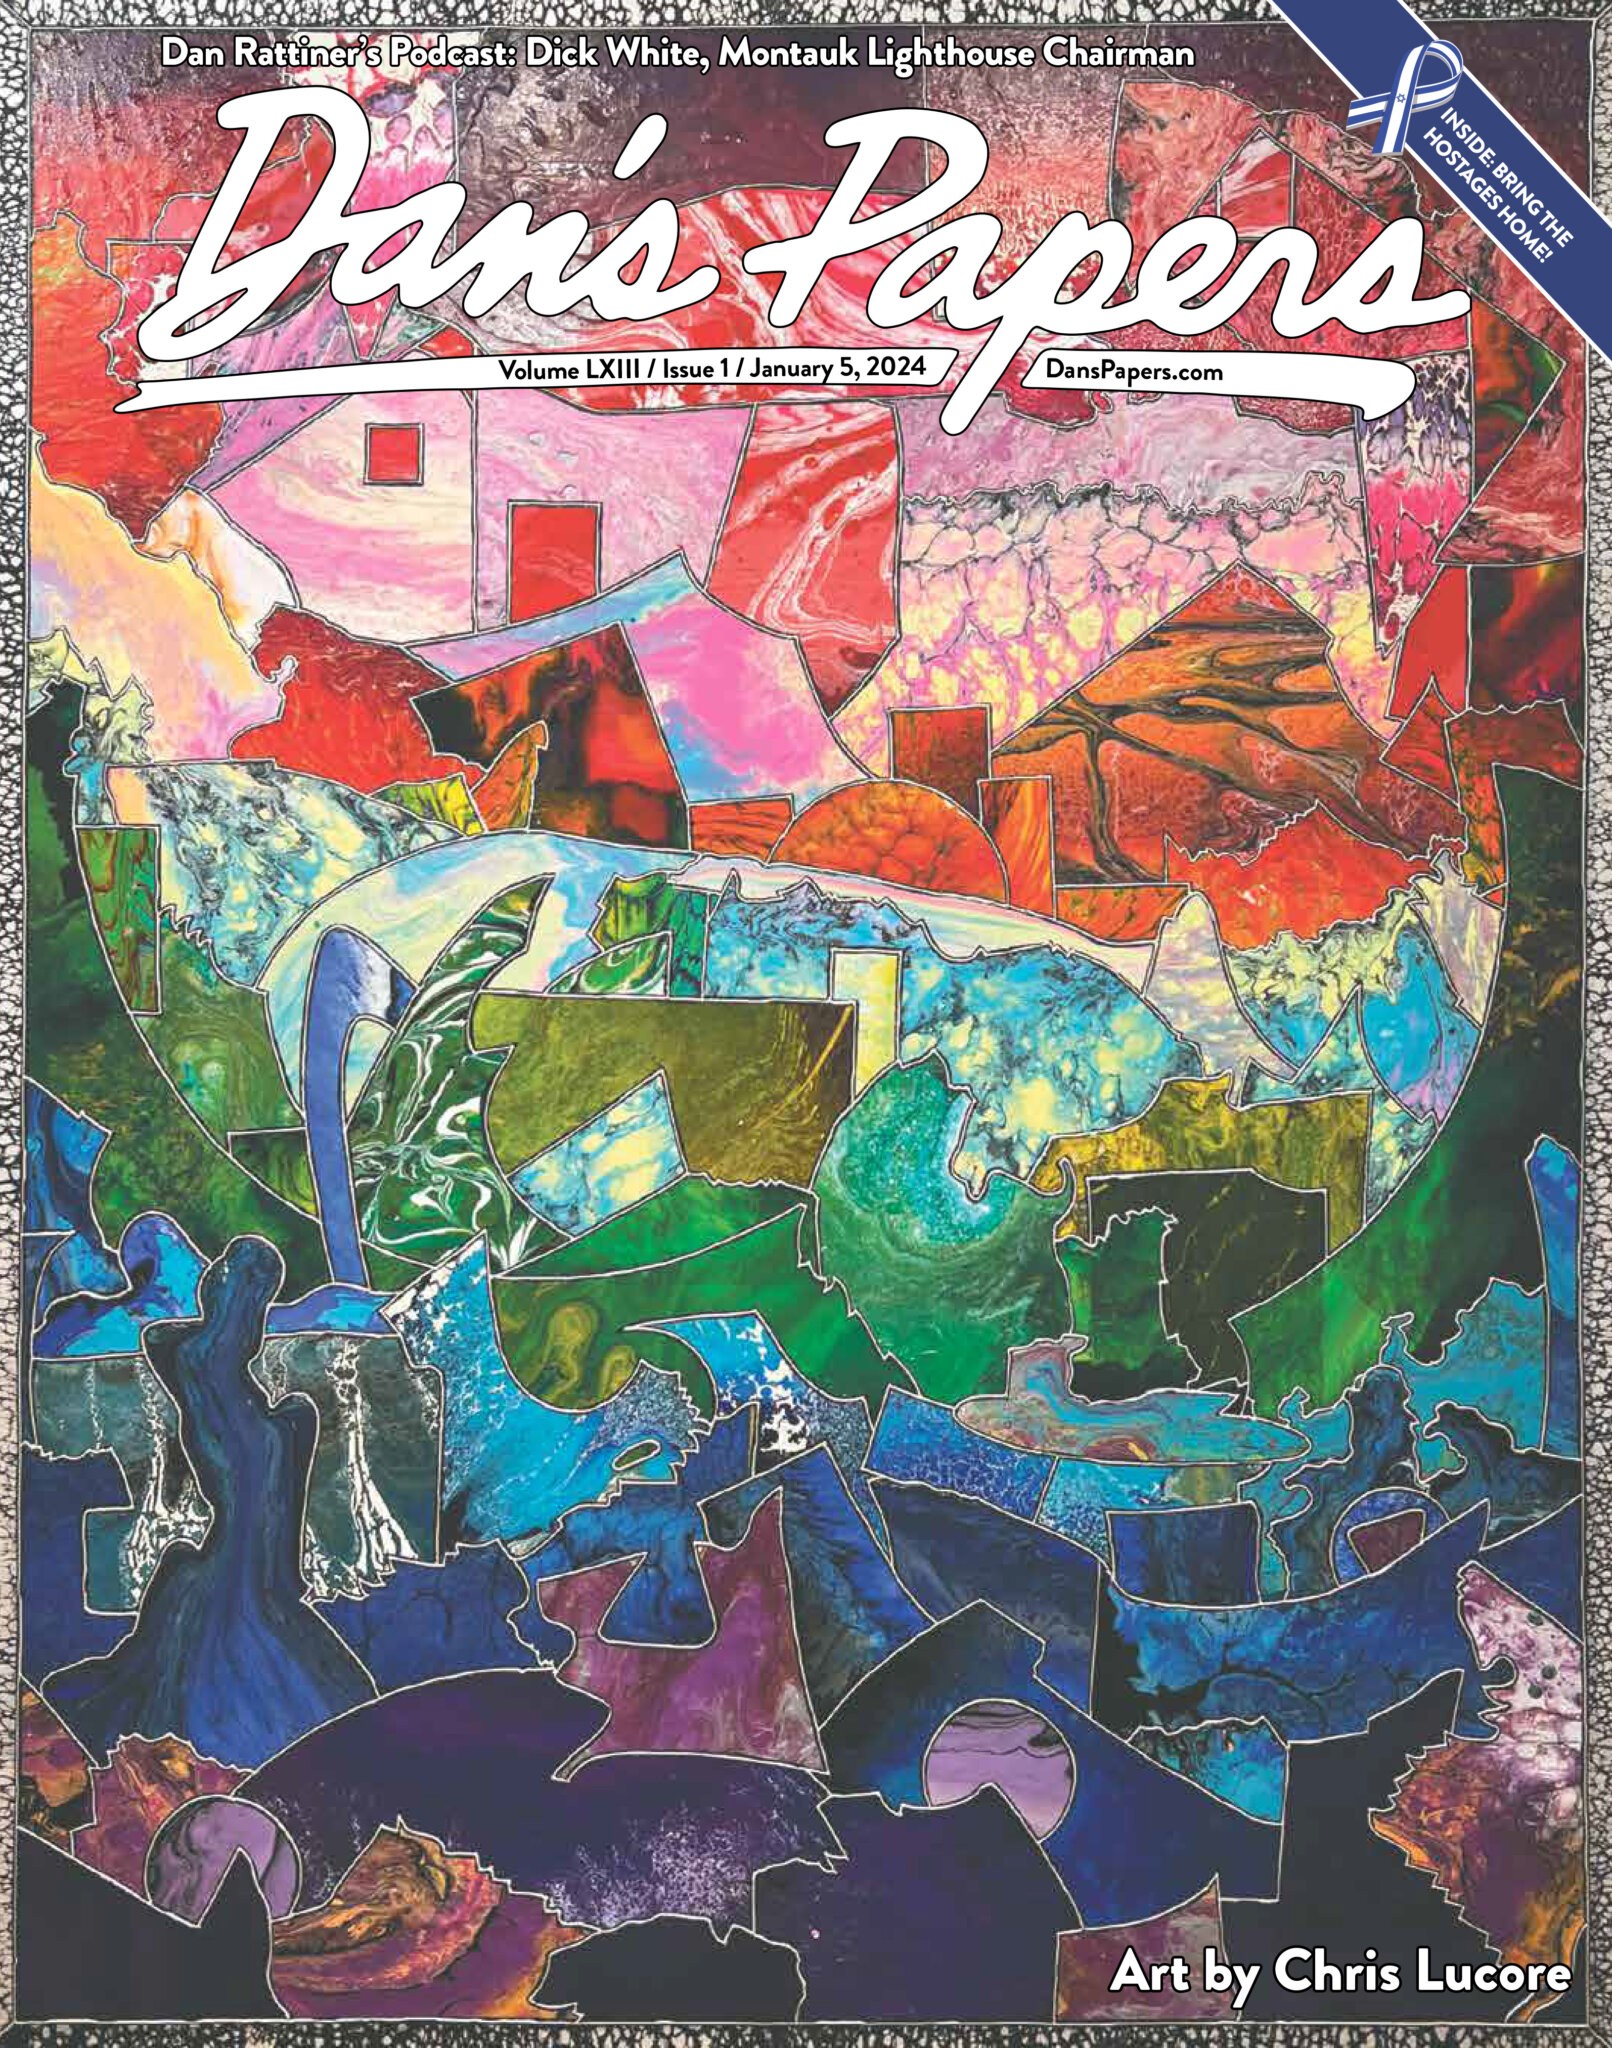 January 5, 2024 Dan's Papers cover art by Christopher Lucore